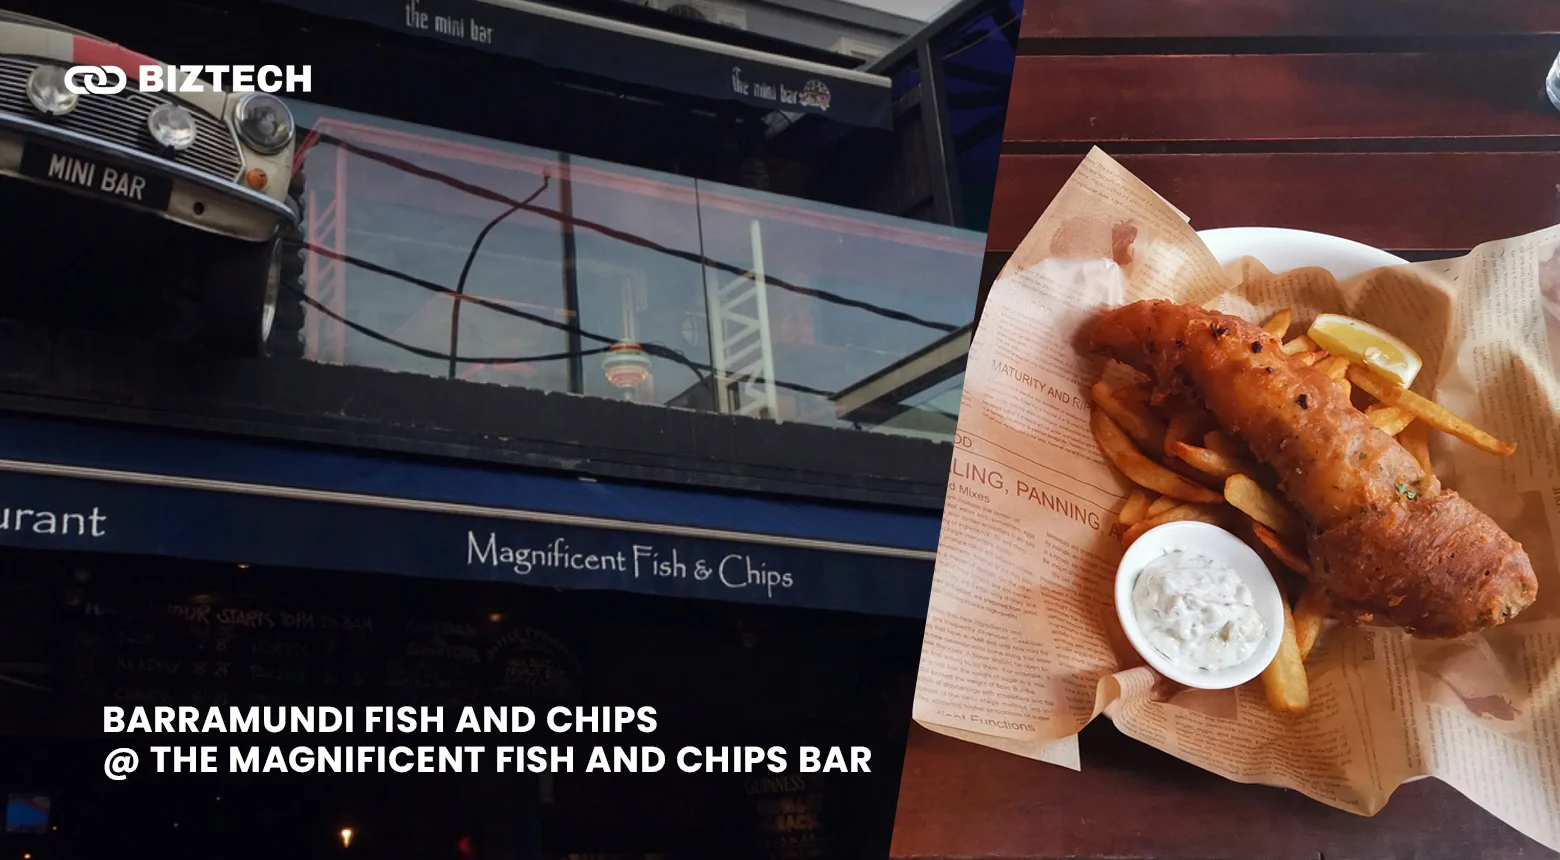 Barramundi Fish and Chips @ The Magnificent Fish and Chips Bar